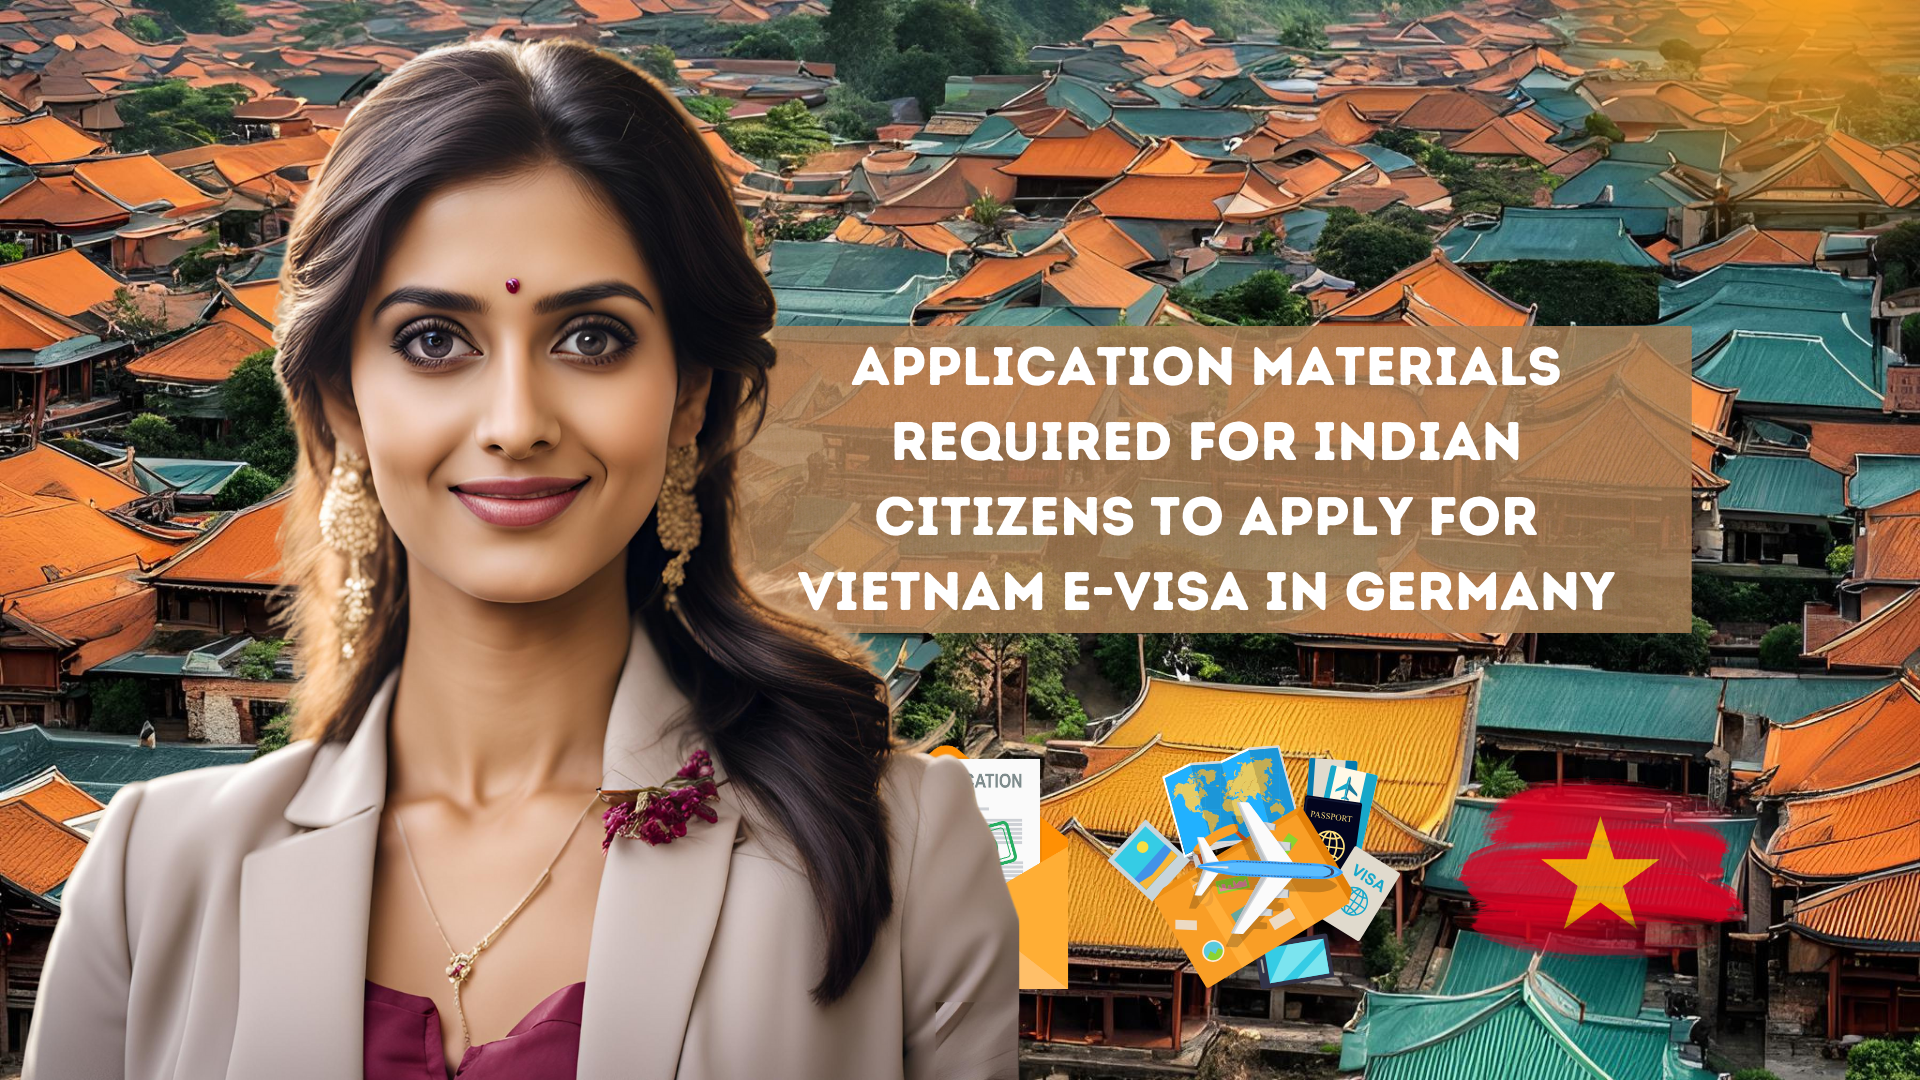 Application materials required for Indian citizens to apply for Vietnam e-visa in Germany